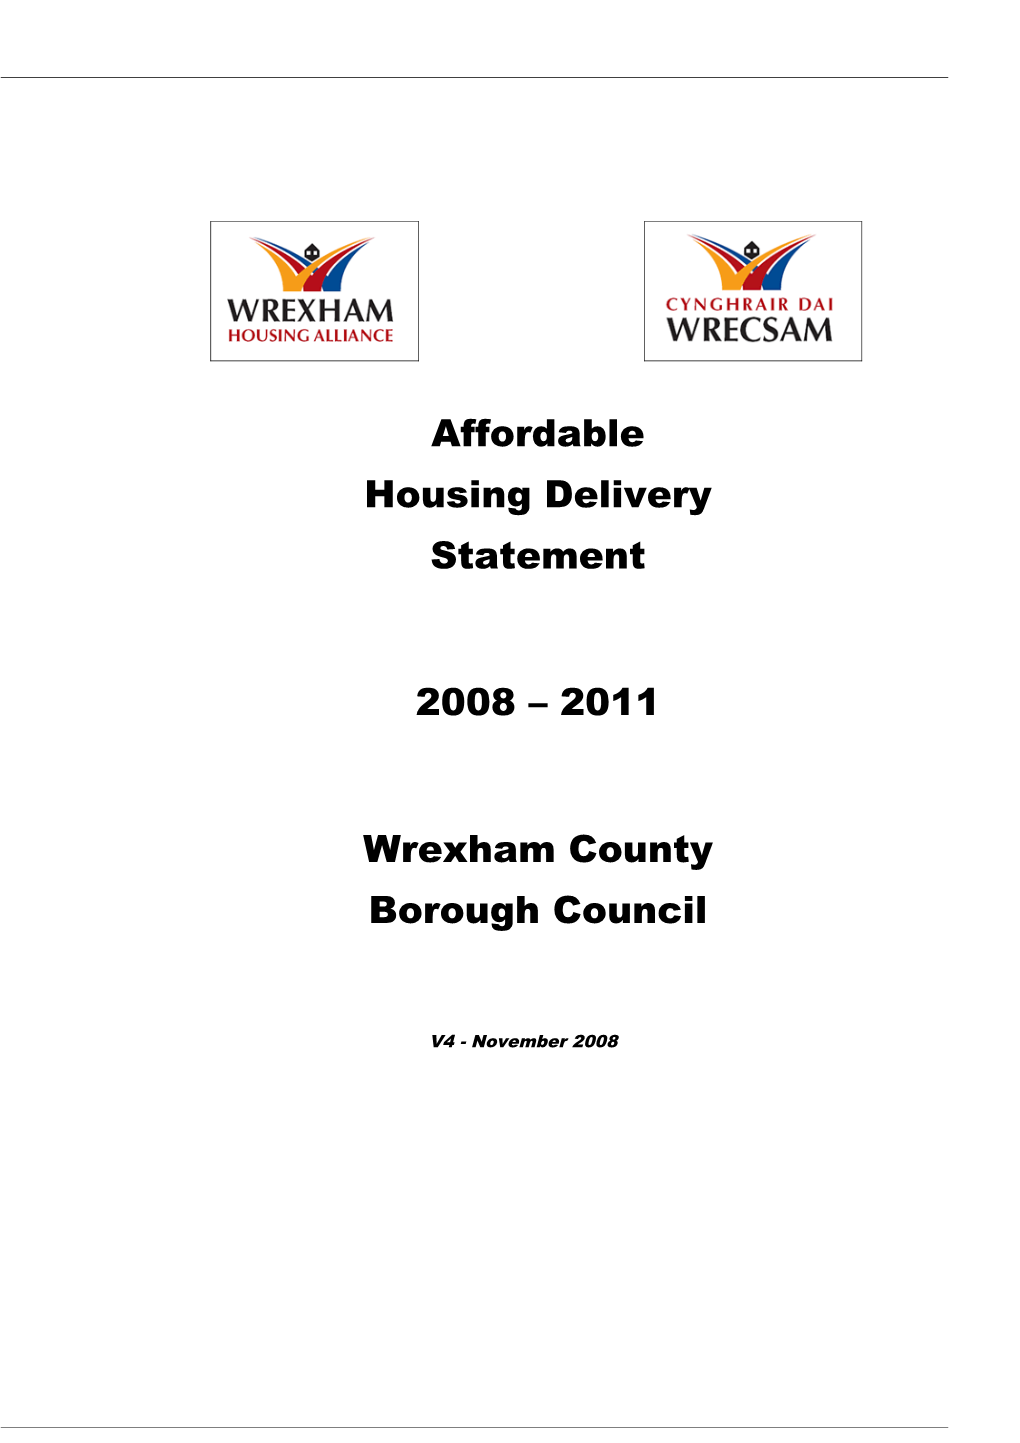 Affordable Housing Delivery Statement 2008-2011